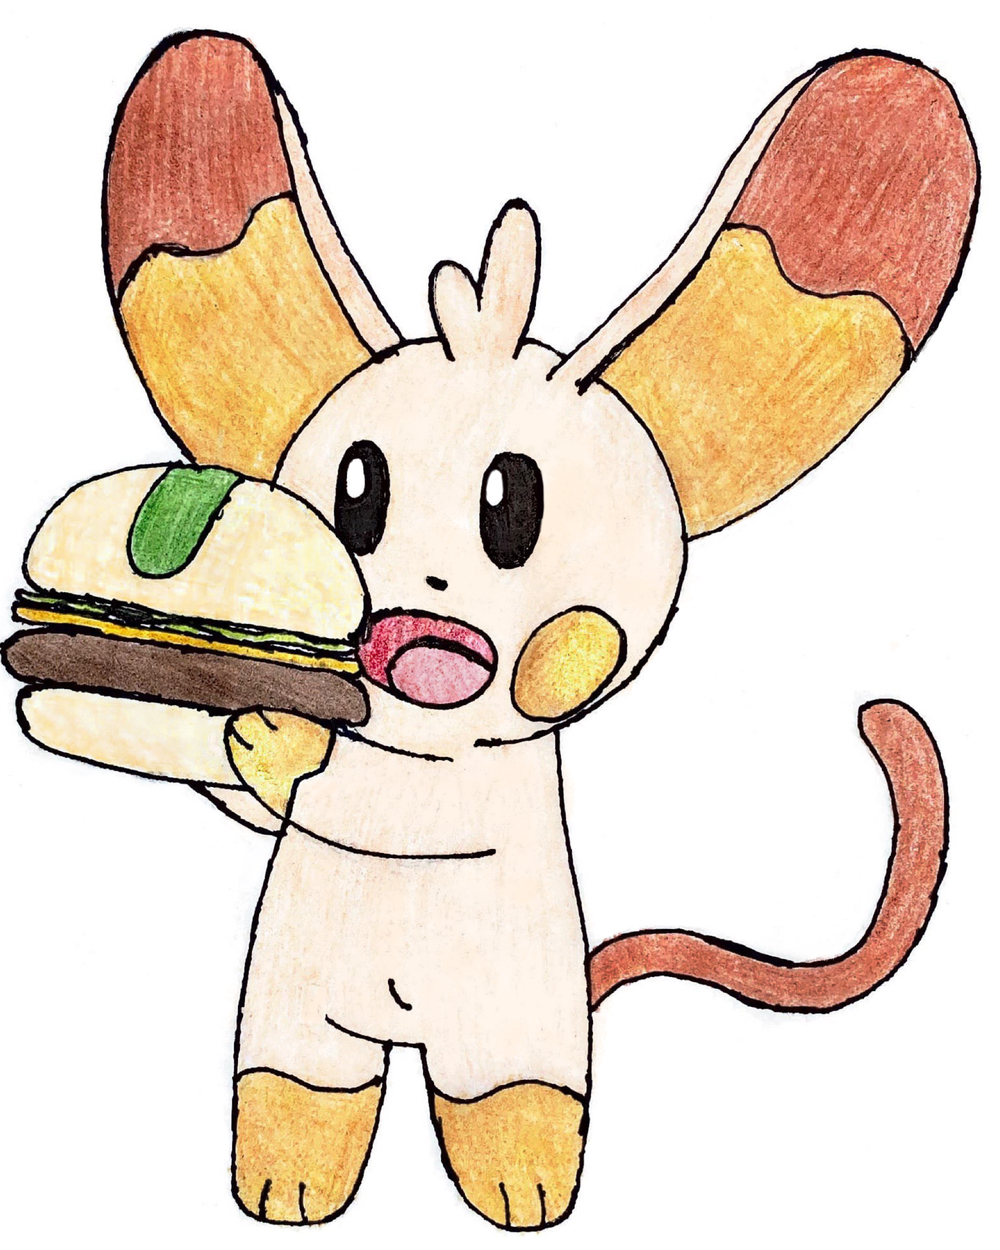 A drawing of Aidan the Mouse holding a big burger with Cheese, Lettuce, and a Pickle on top.